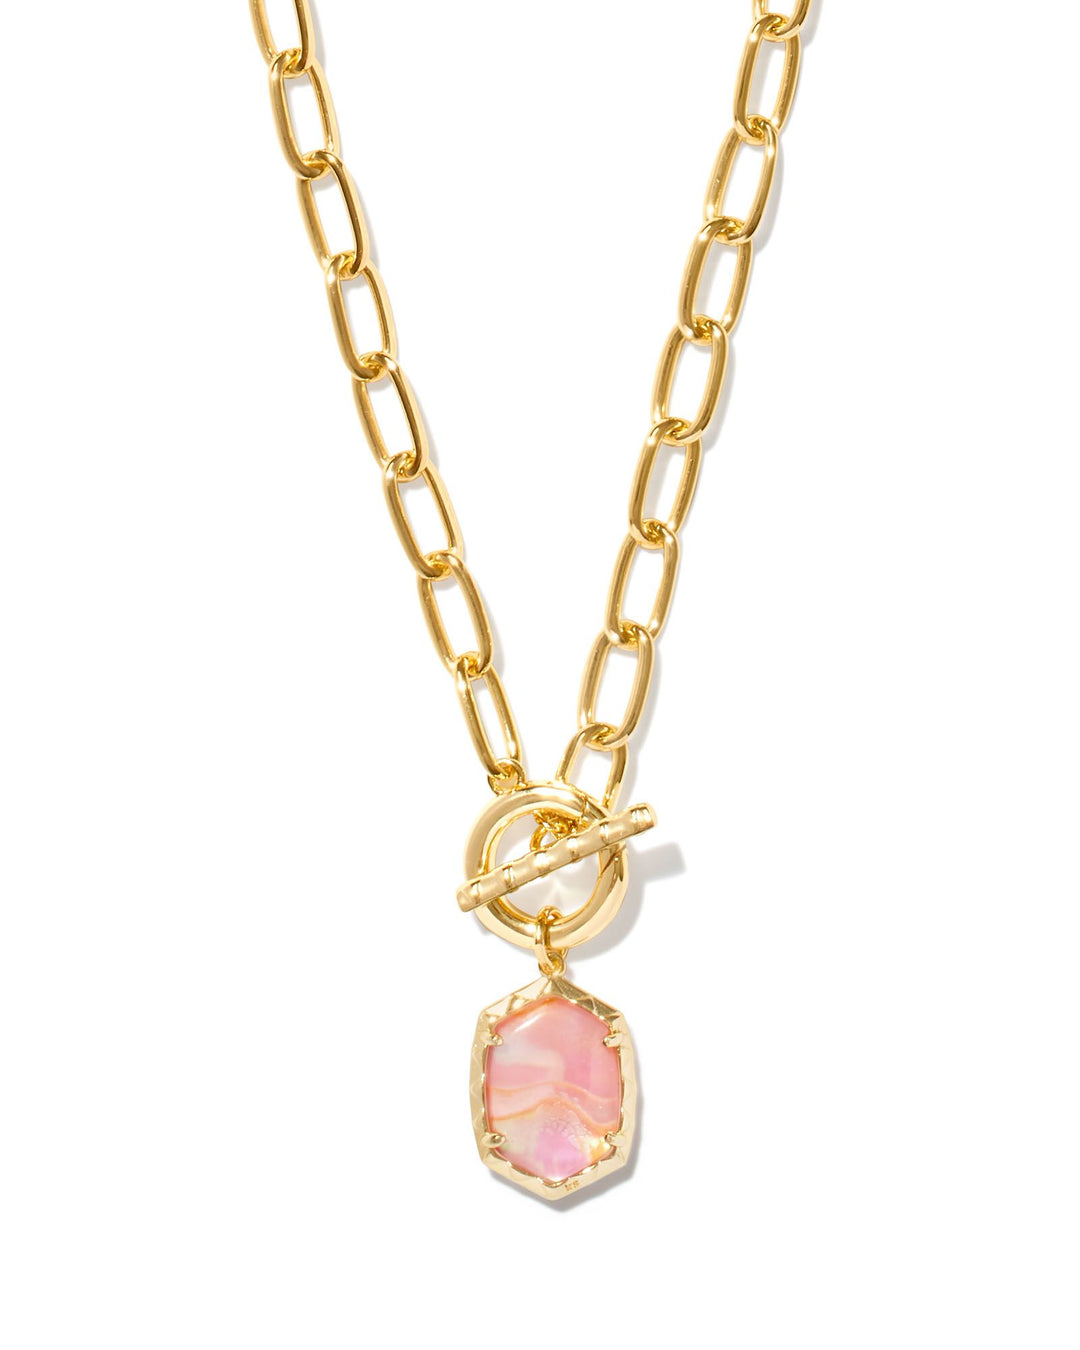 DAPHNE LINK & CHAIN NECKLACE, GOLD LIGHT PINK IRIDESCENT ABALONE